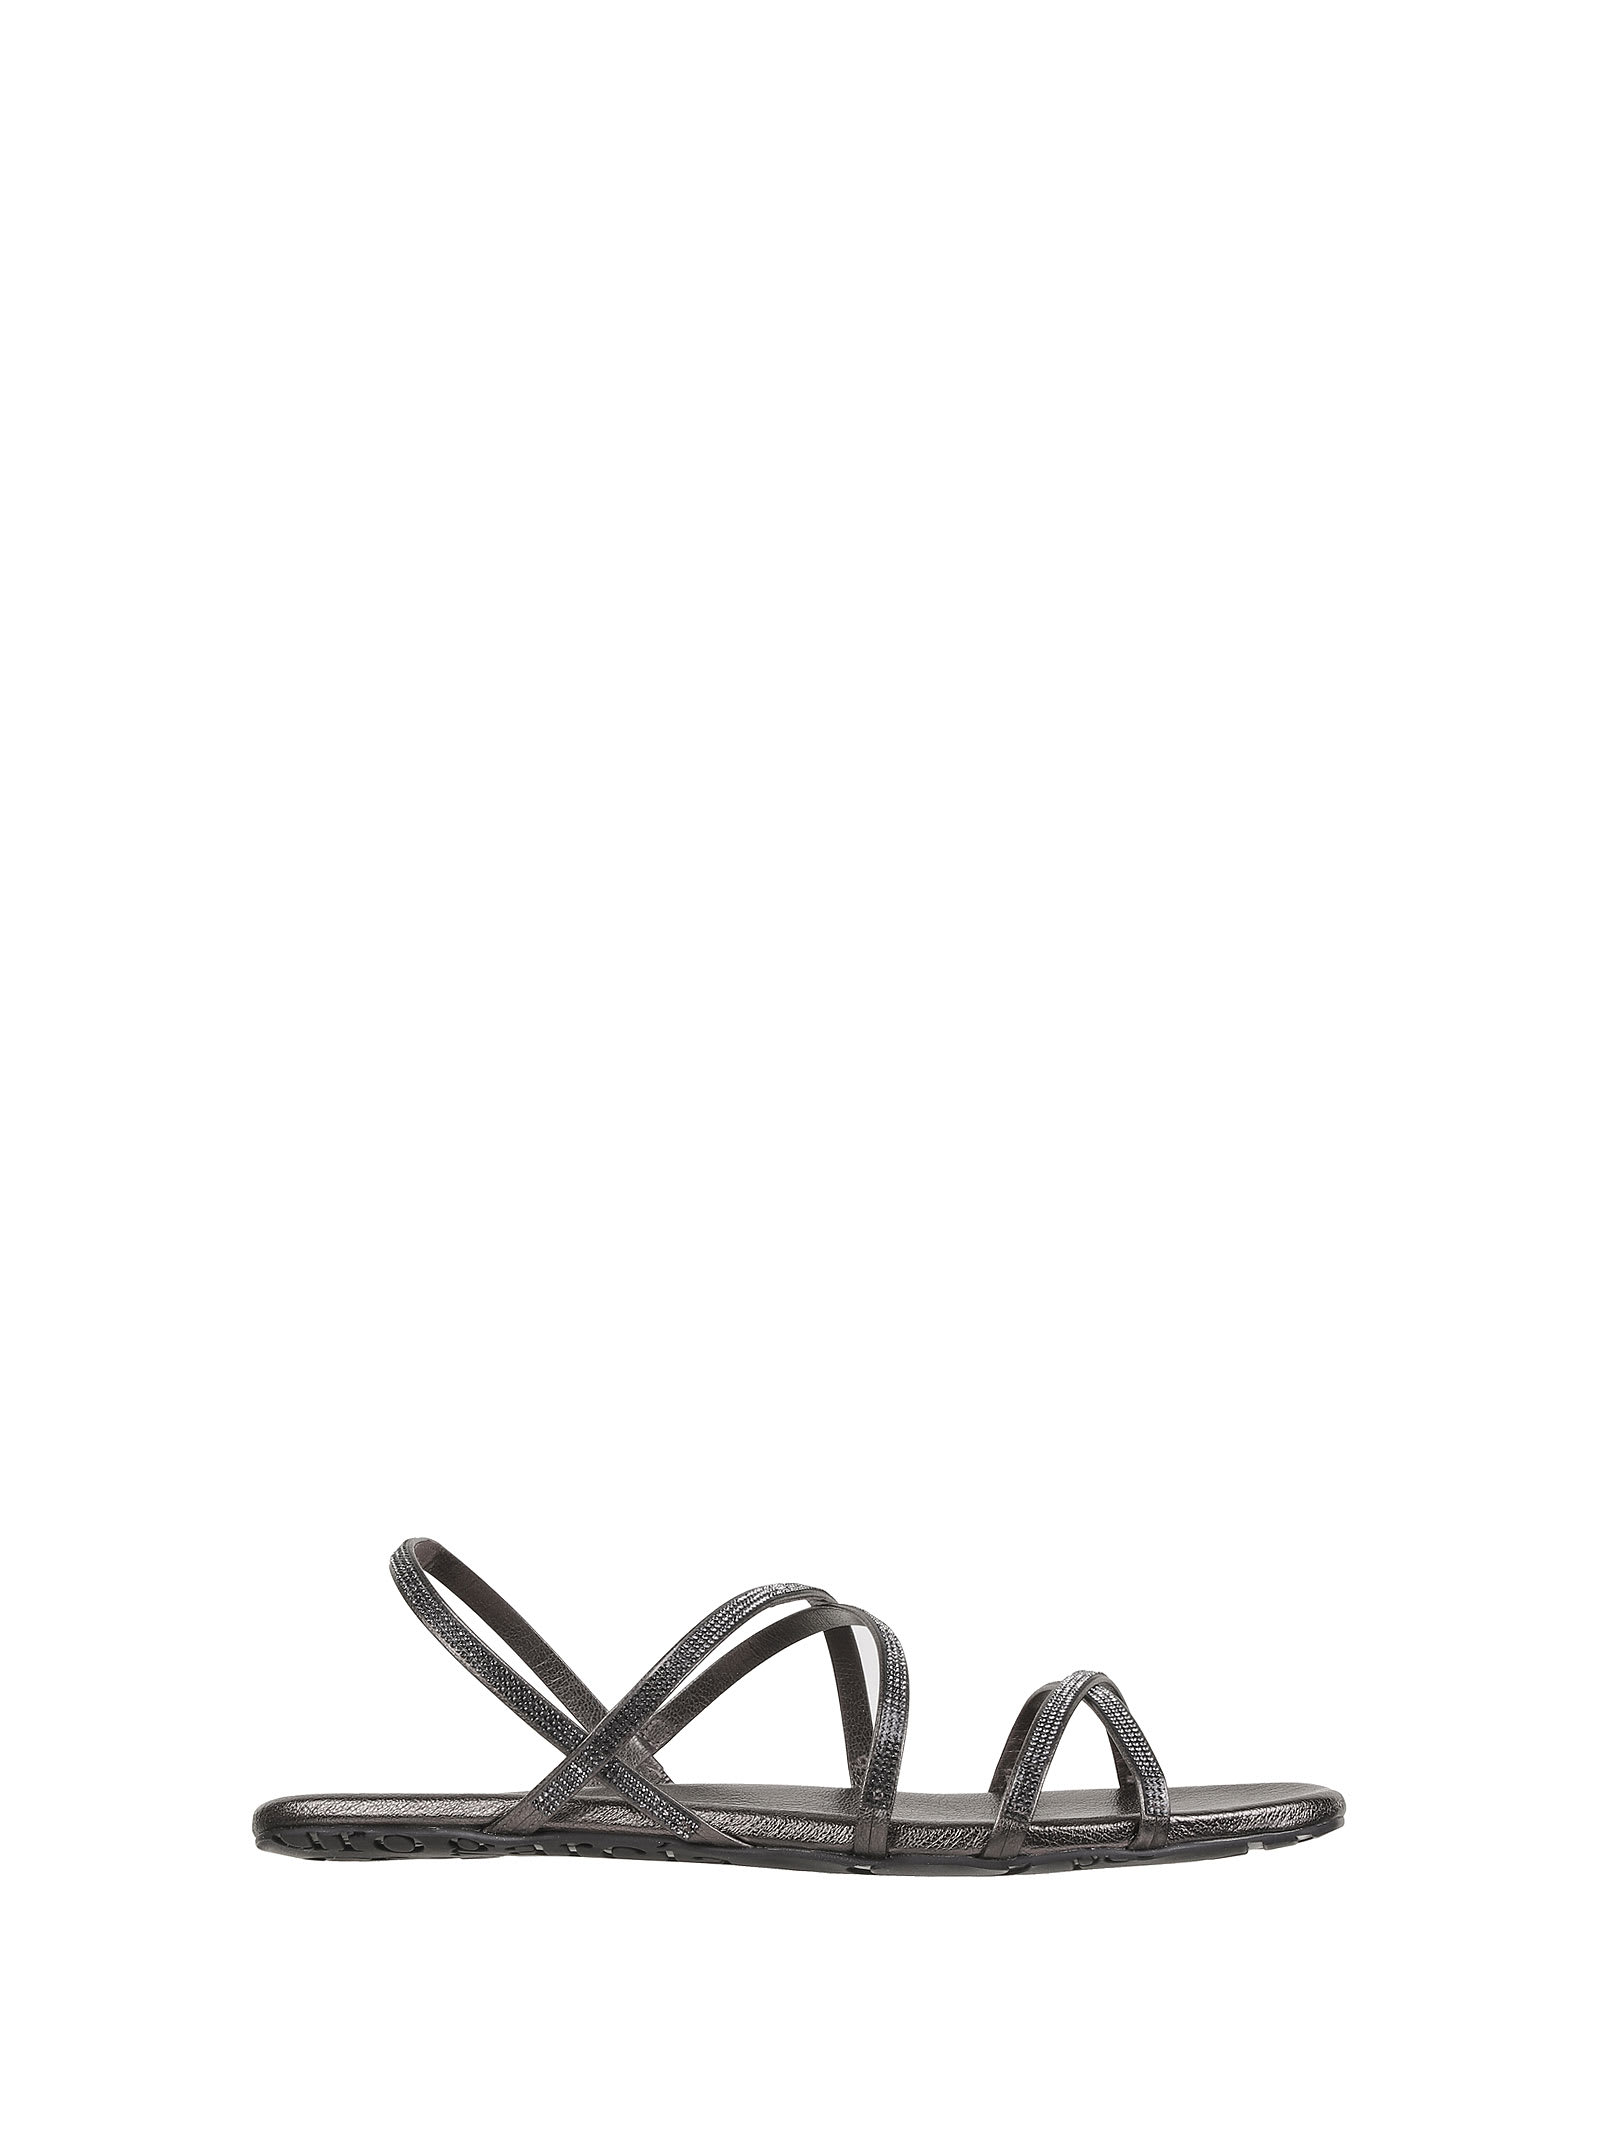 Pedro Garcia Sandal With Strass In Gunmetal Leather